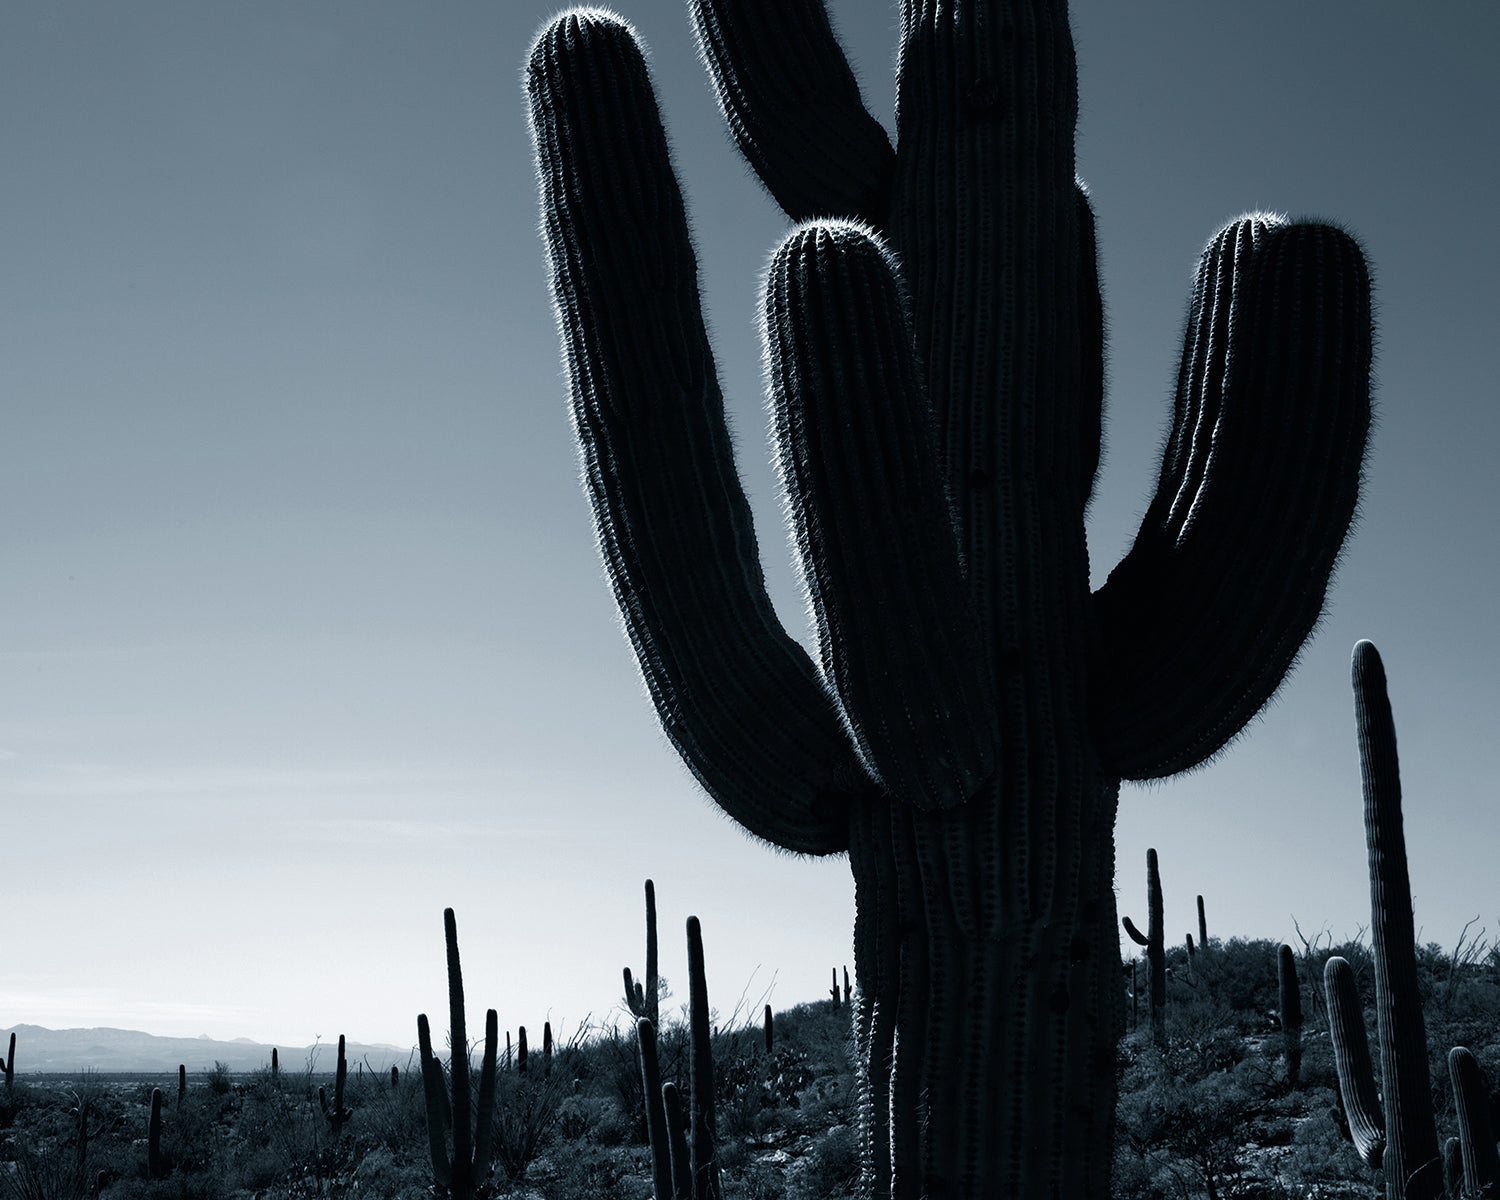 Photograph of silhouetted cacti.